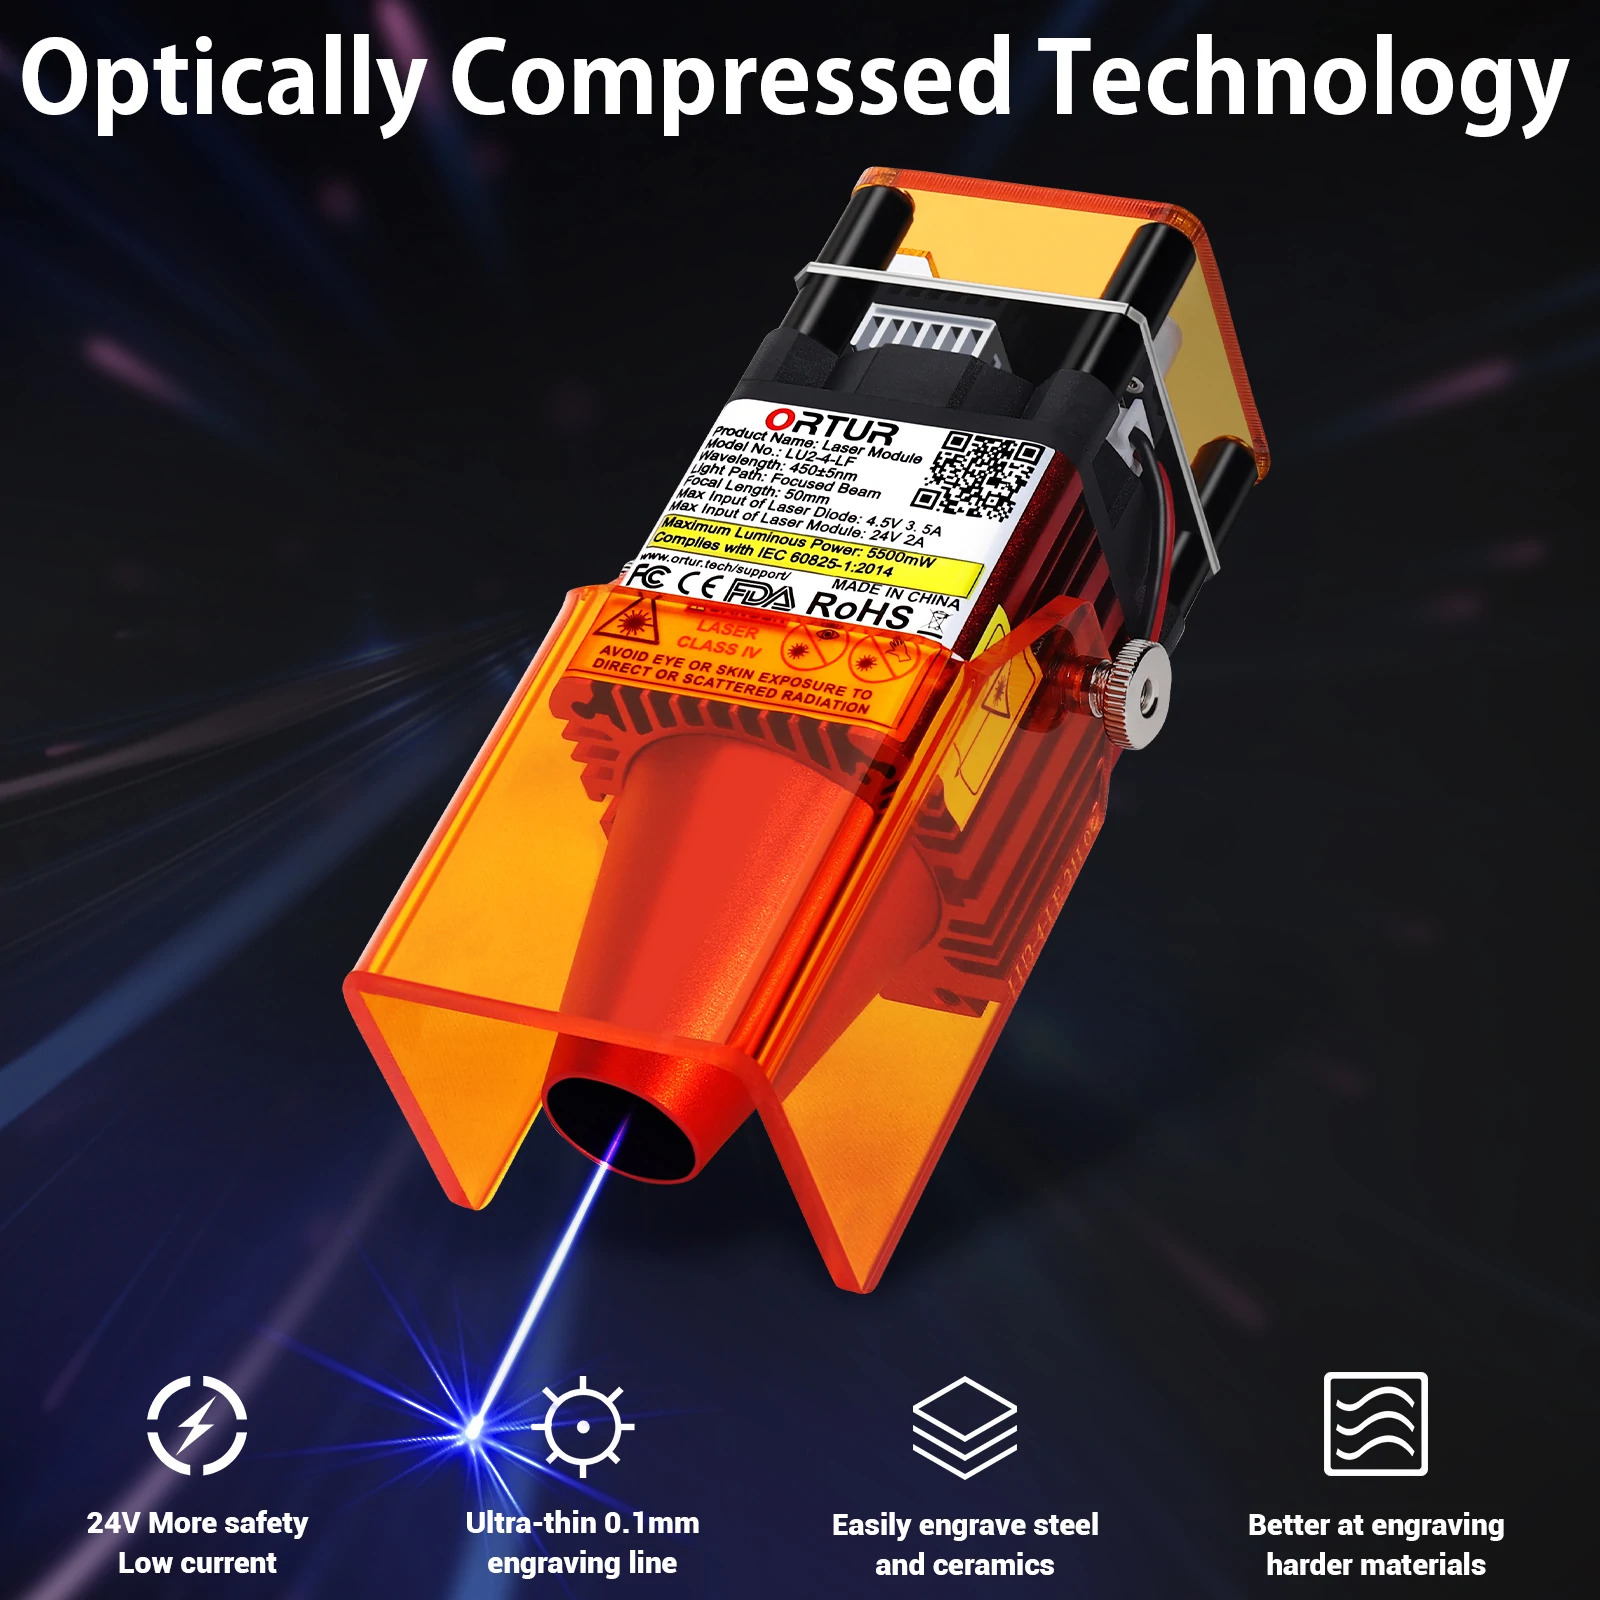 Optically Compressing Technology of the Laser Module